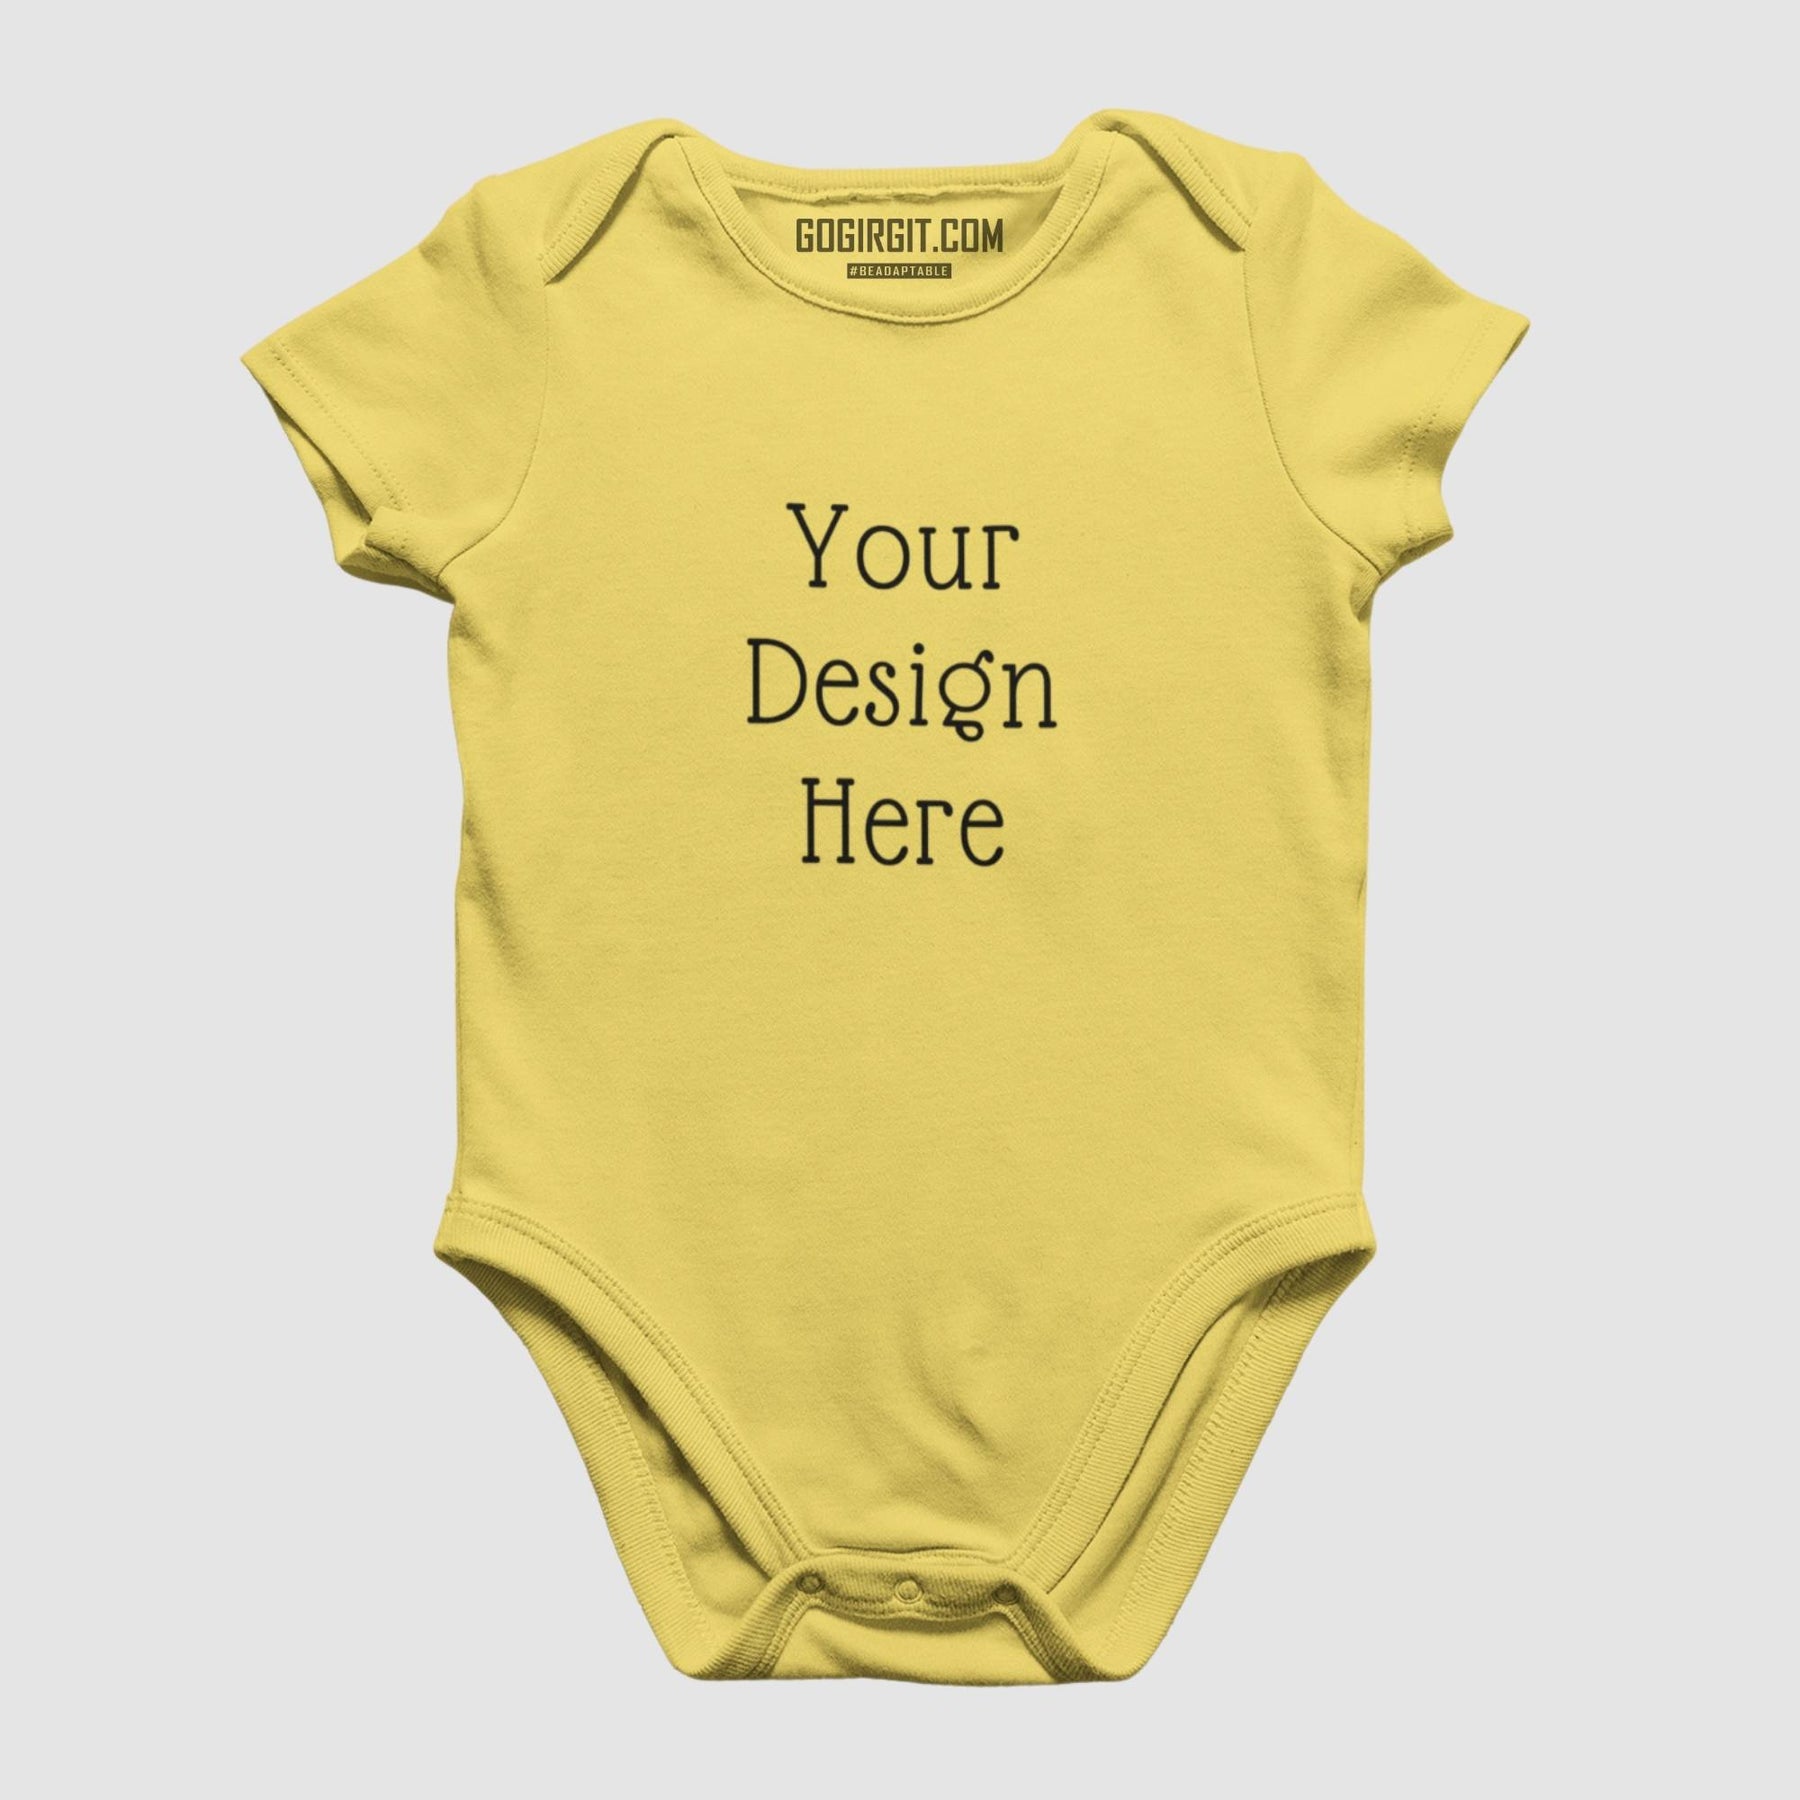 cotton-rompers-for-kids-also-called-onesie-personalised-and-customized-color-yellow-gogirgit